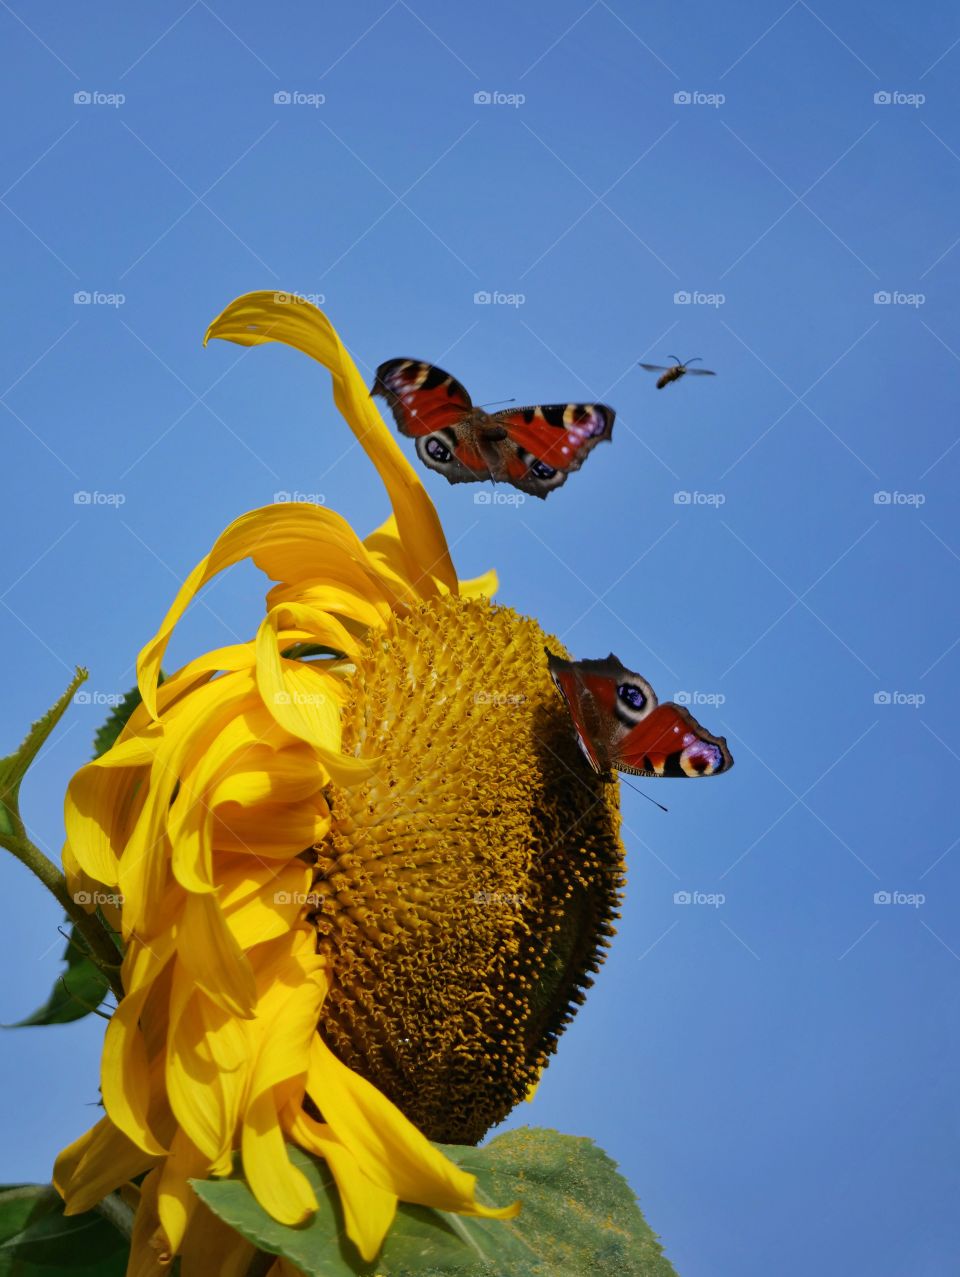 Insects searching for nectar